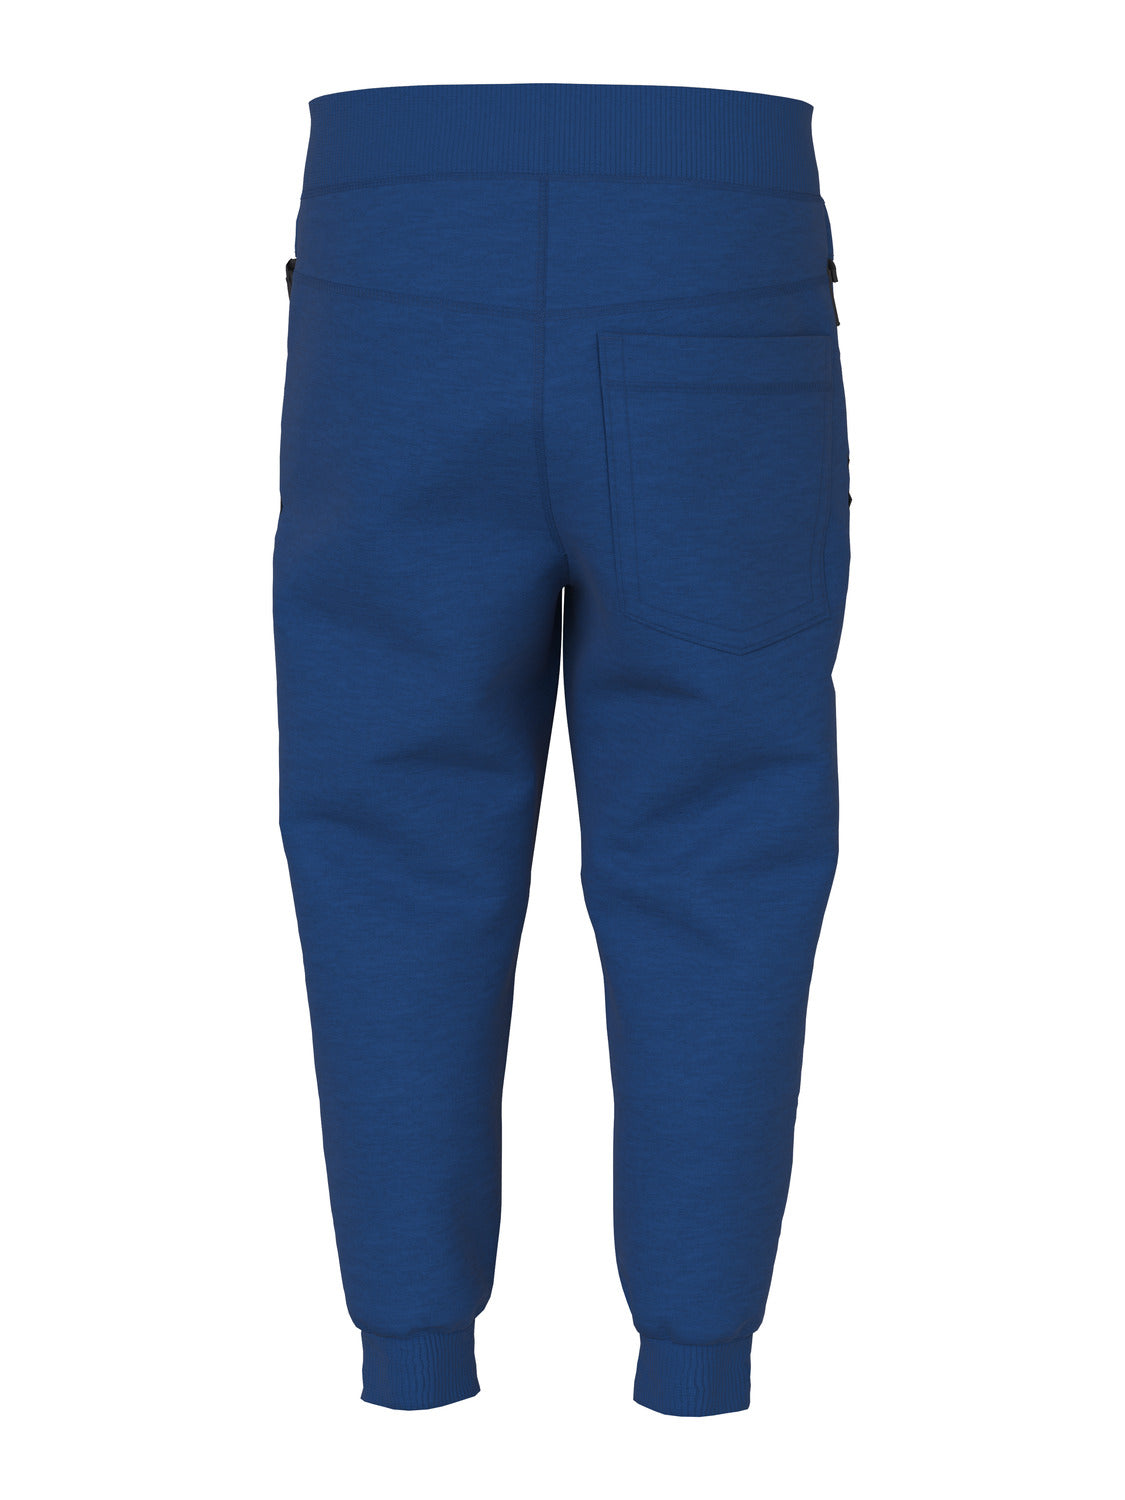 NMMVIMO Trousers - True Blue